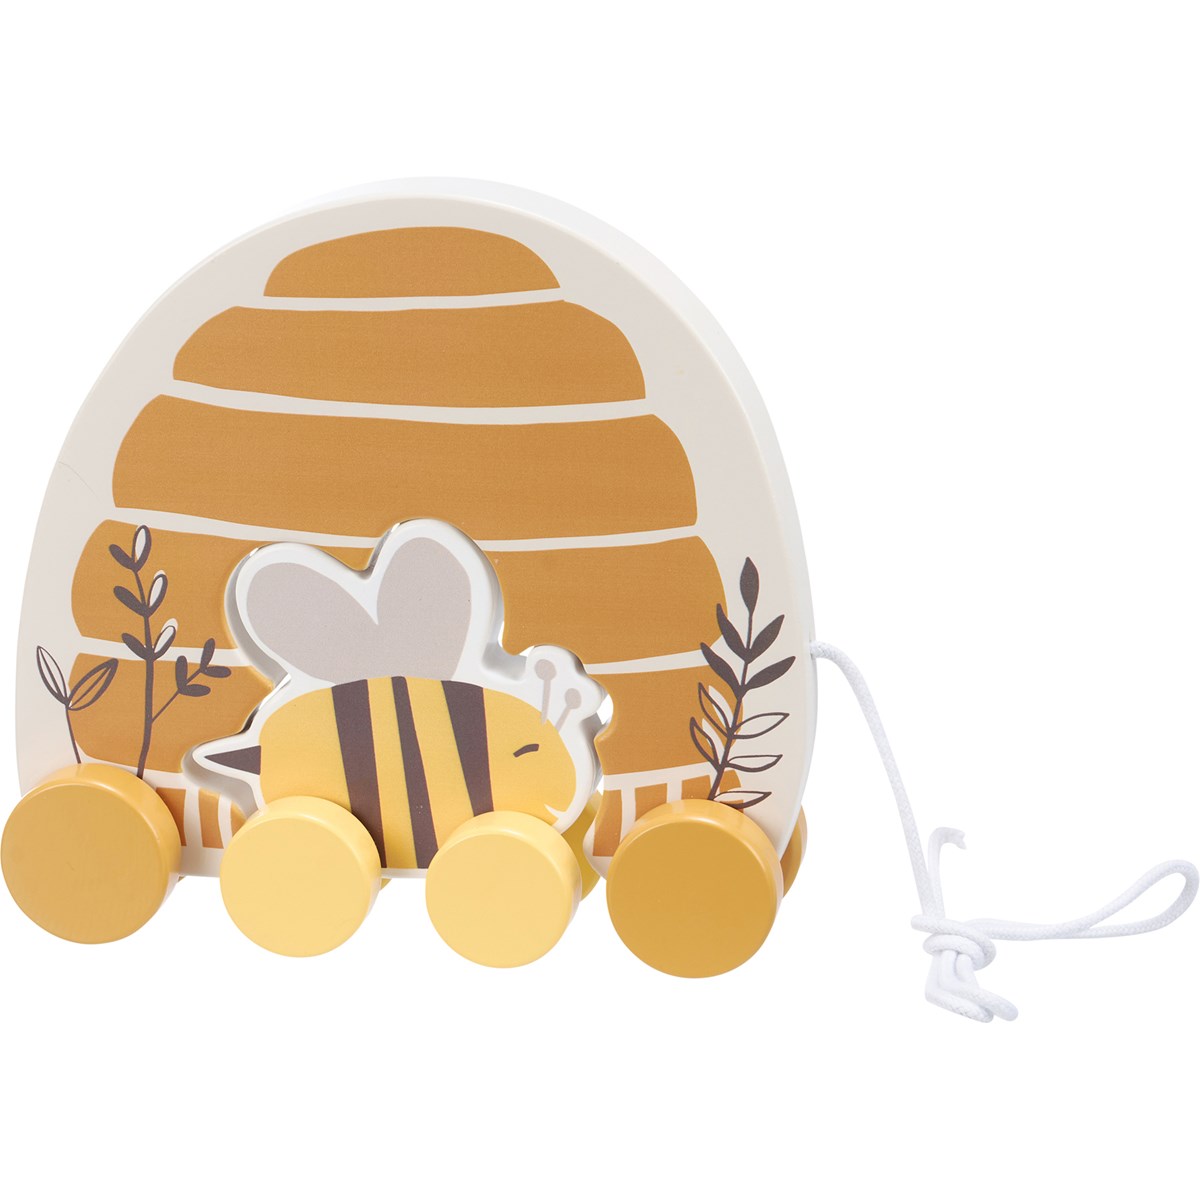 Pull Toy - Skep And Bee - 7" x 7" x 2" - Wood, Metal, String